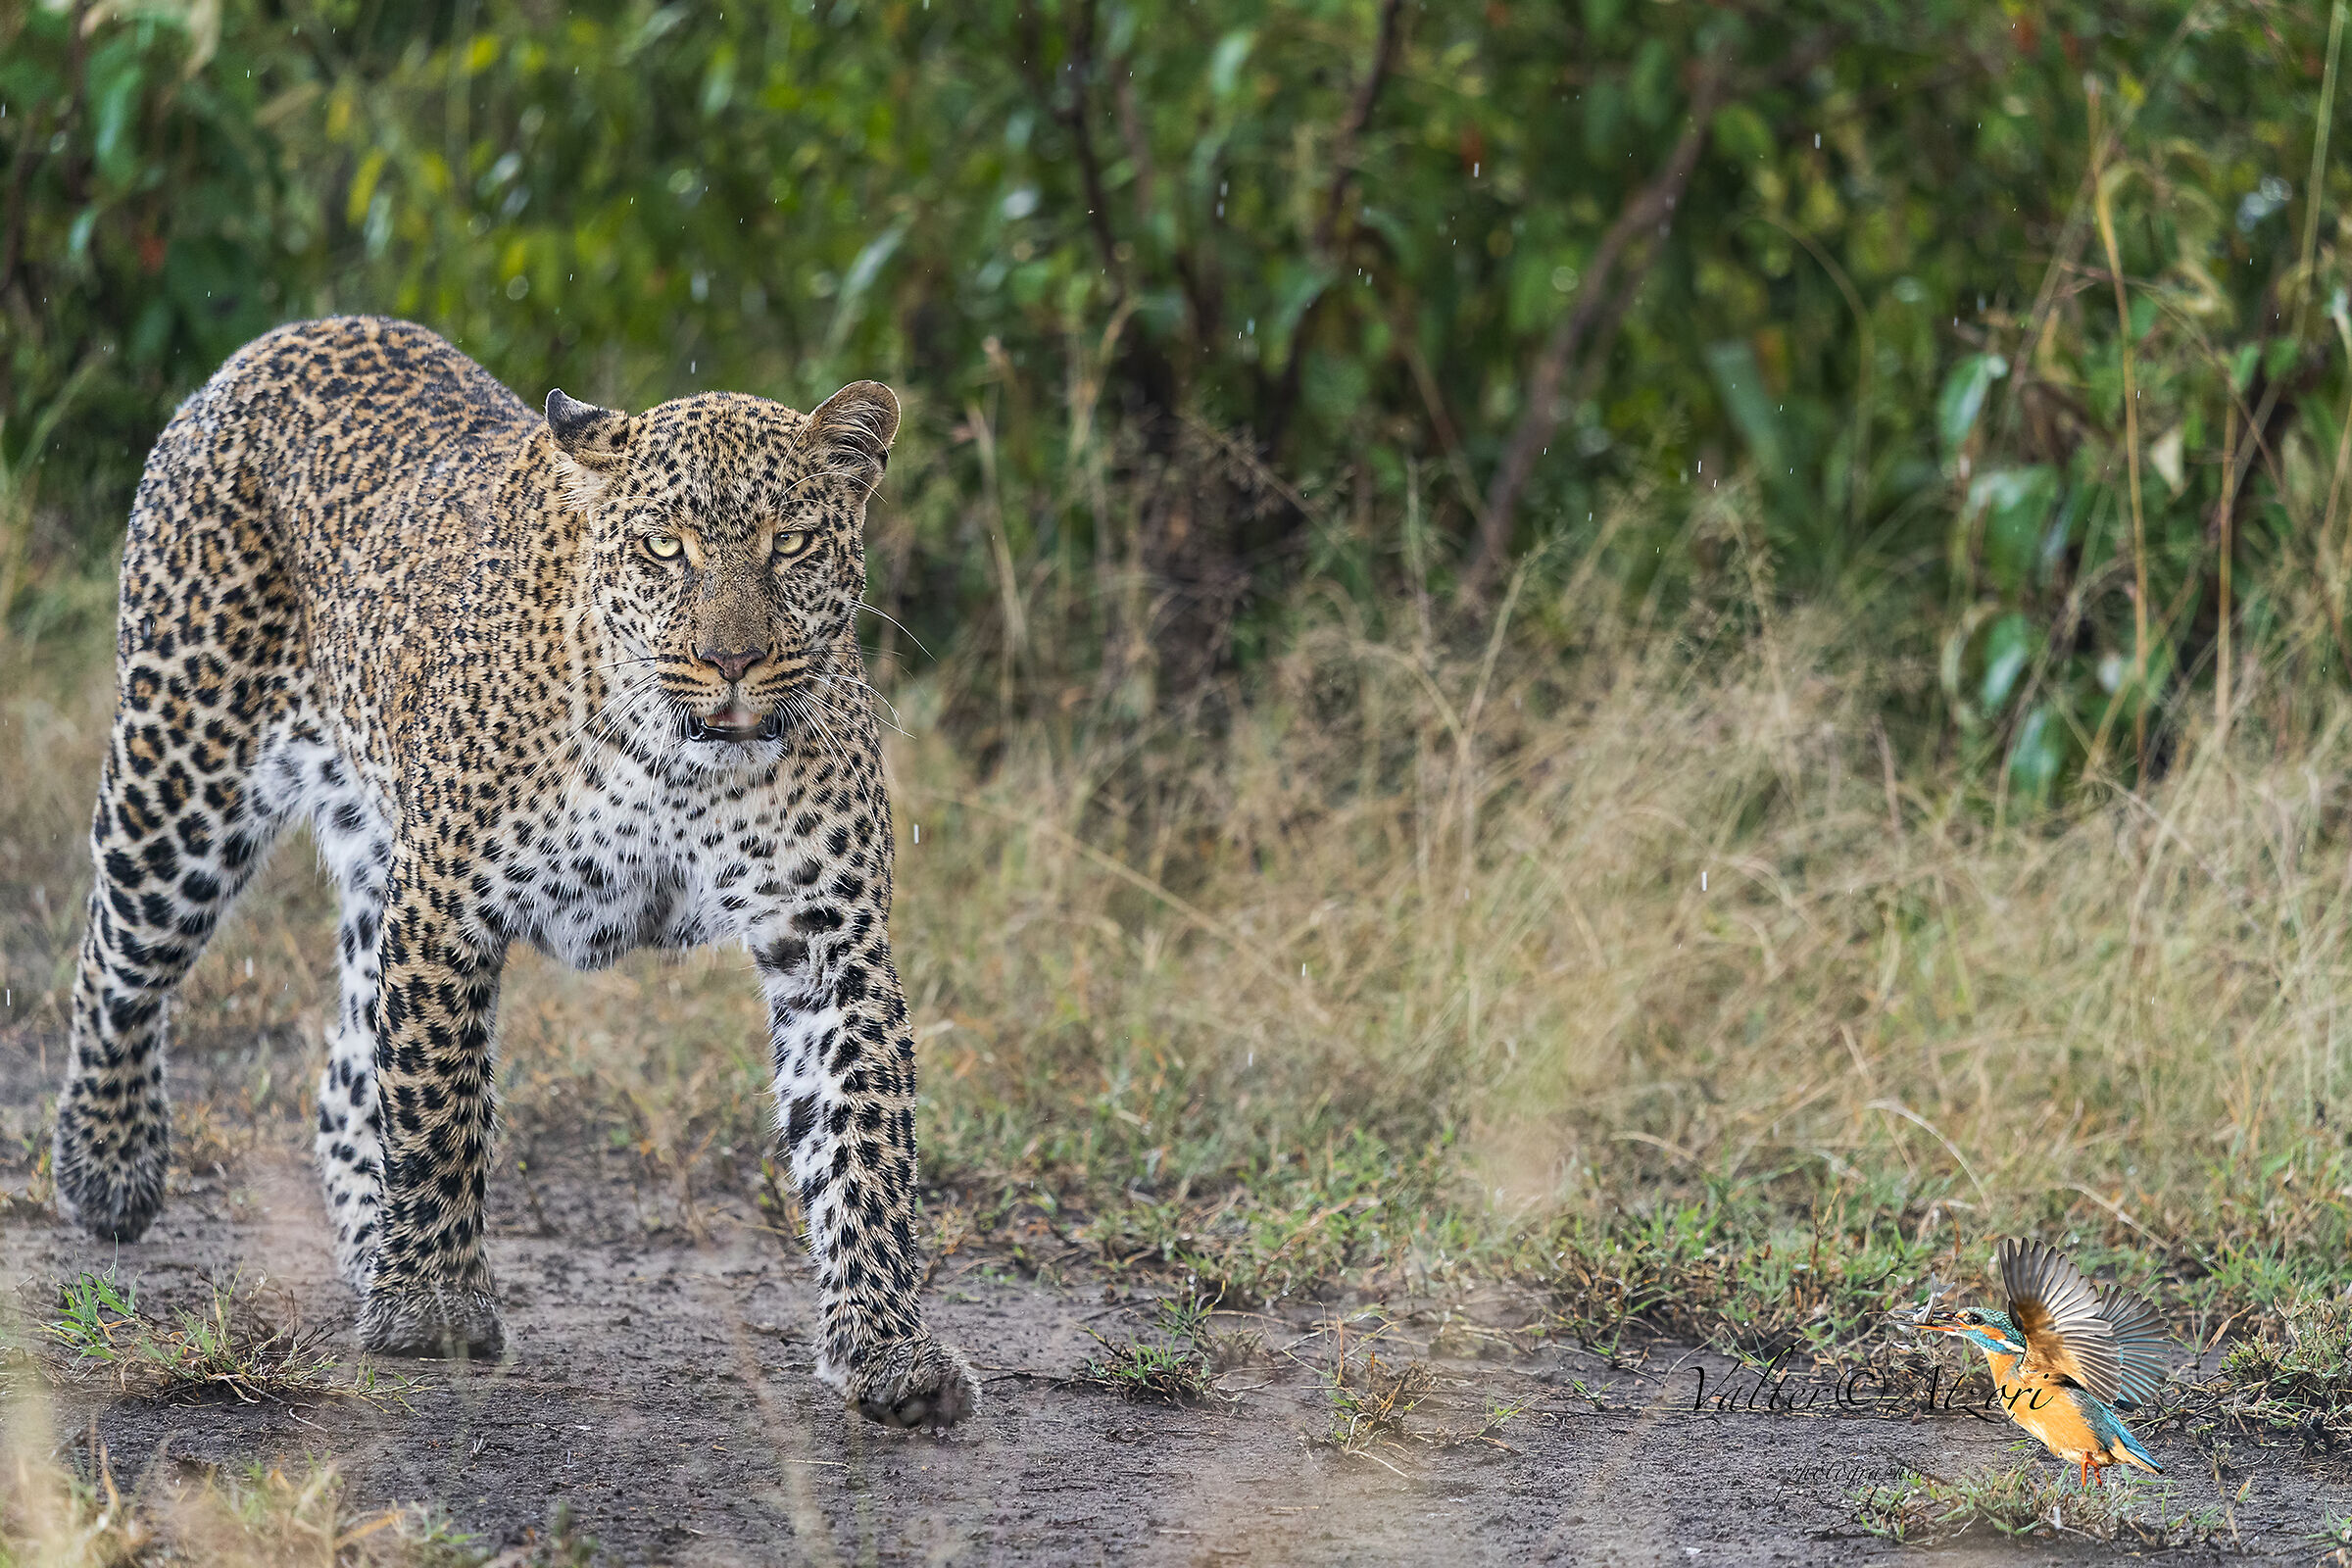 Female leopard released at the end of the rain...